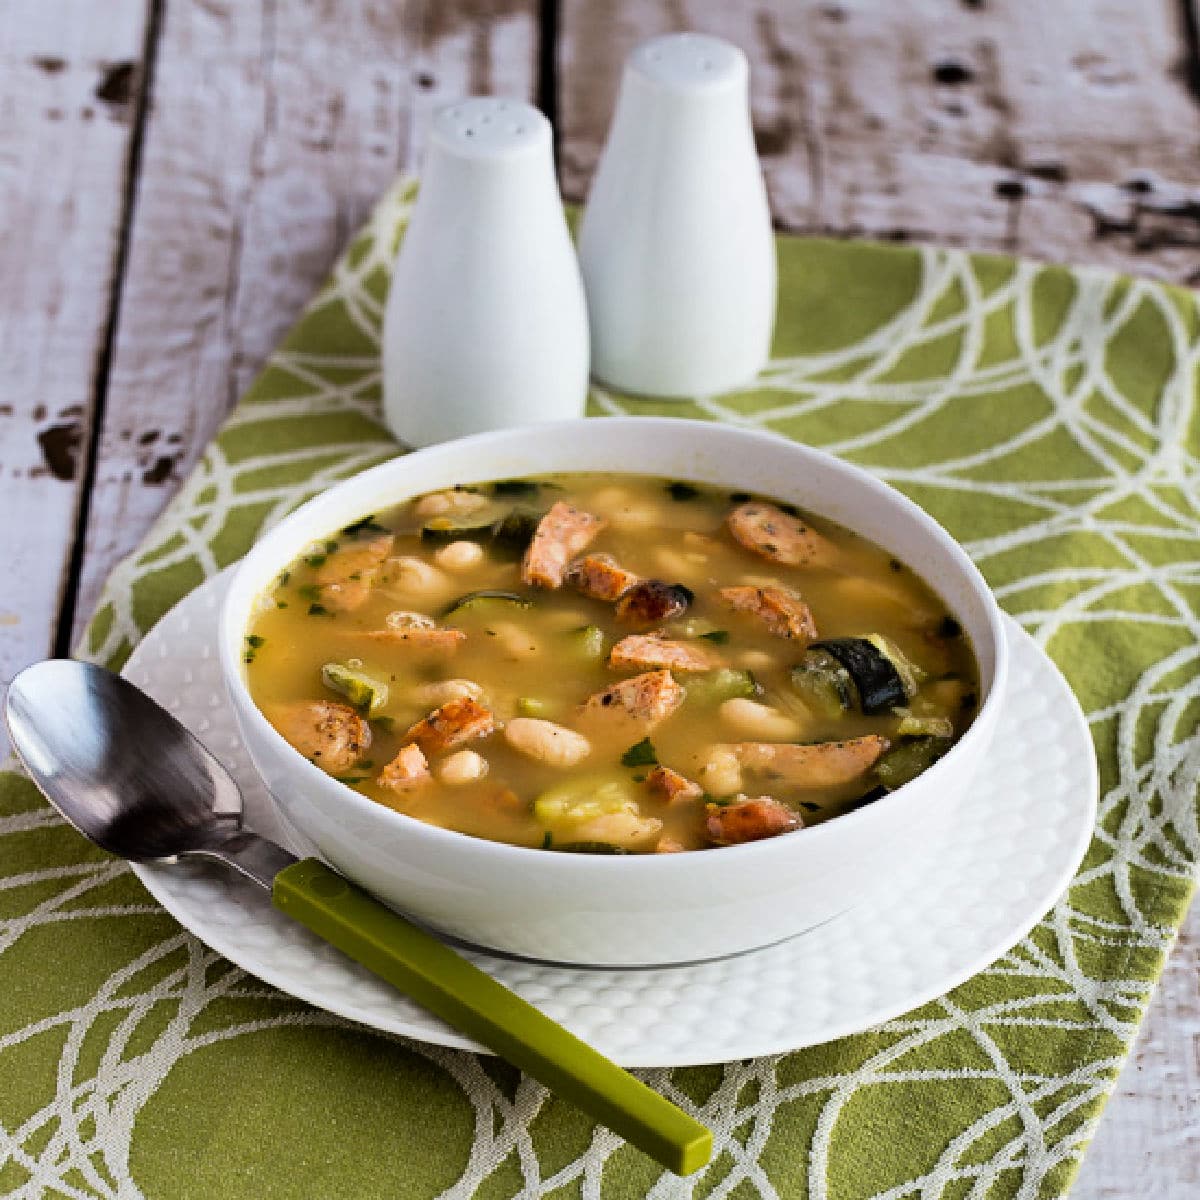 Square image of White Bean Soup with Italian Sausage, Zucchini, and Basil shown in soup bowl.